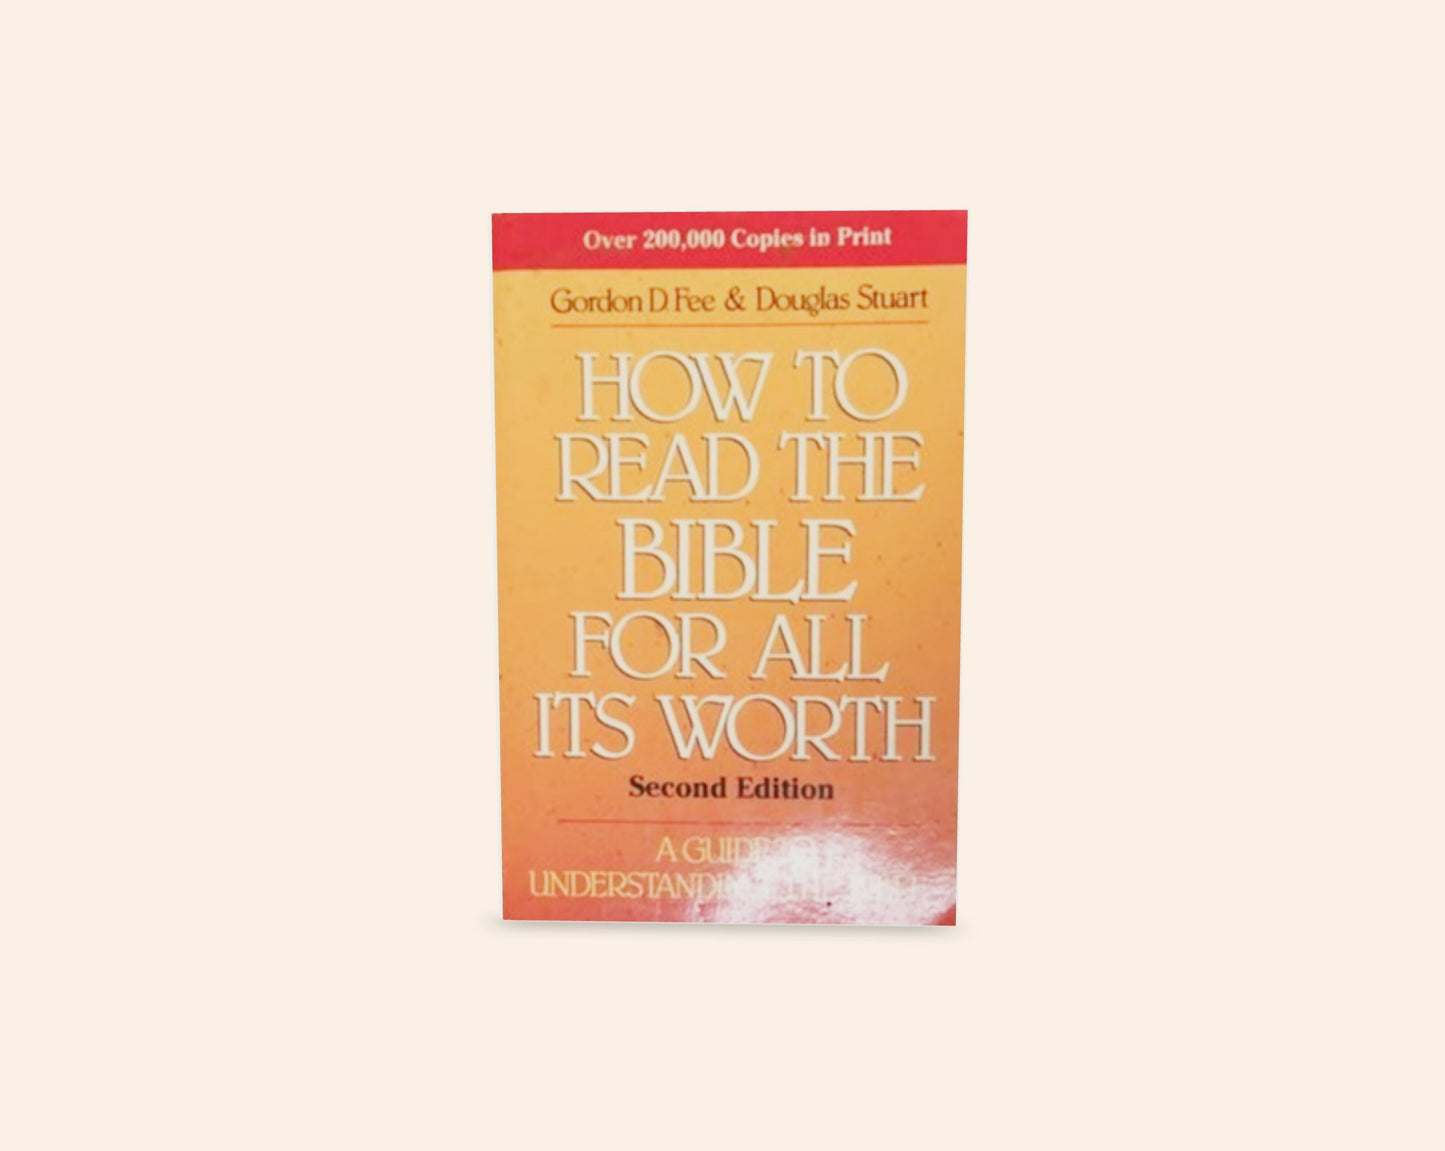 How to read the Bible for all its worth: Second edition - Gordon D. Fee & Douglas Stuart